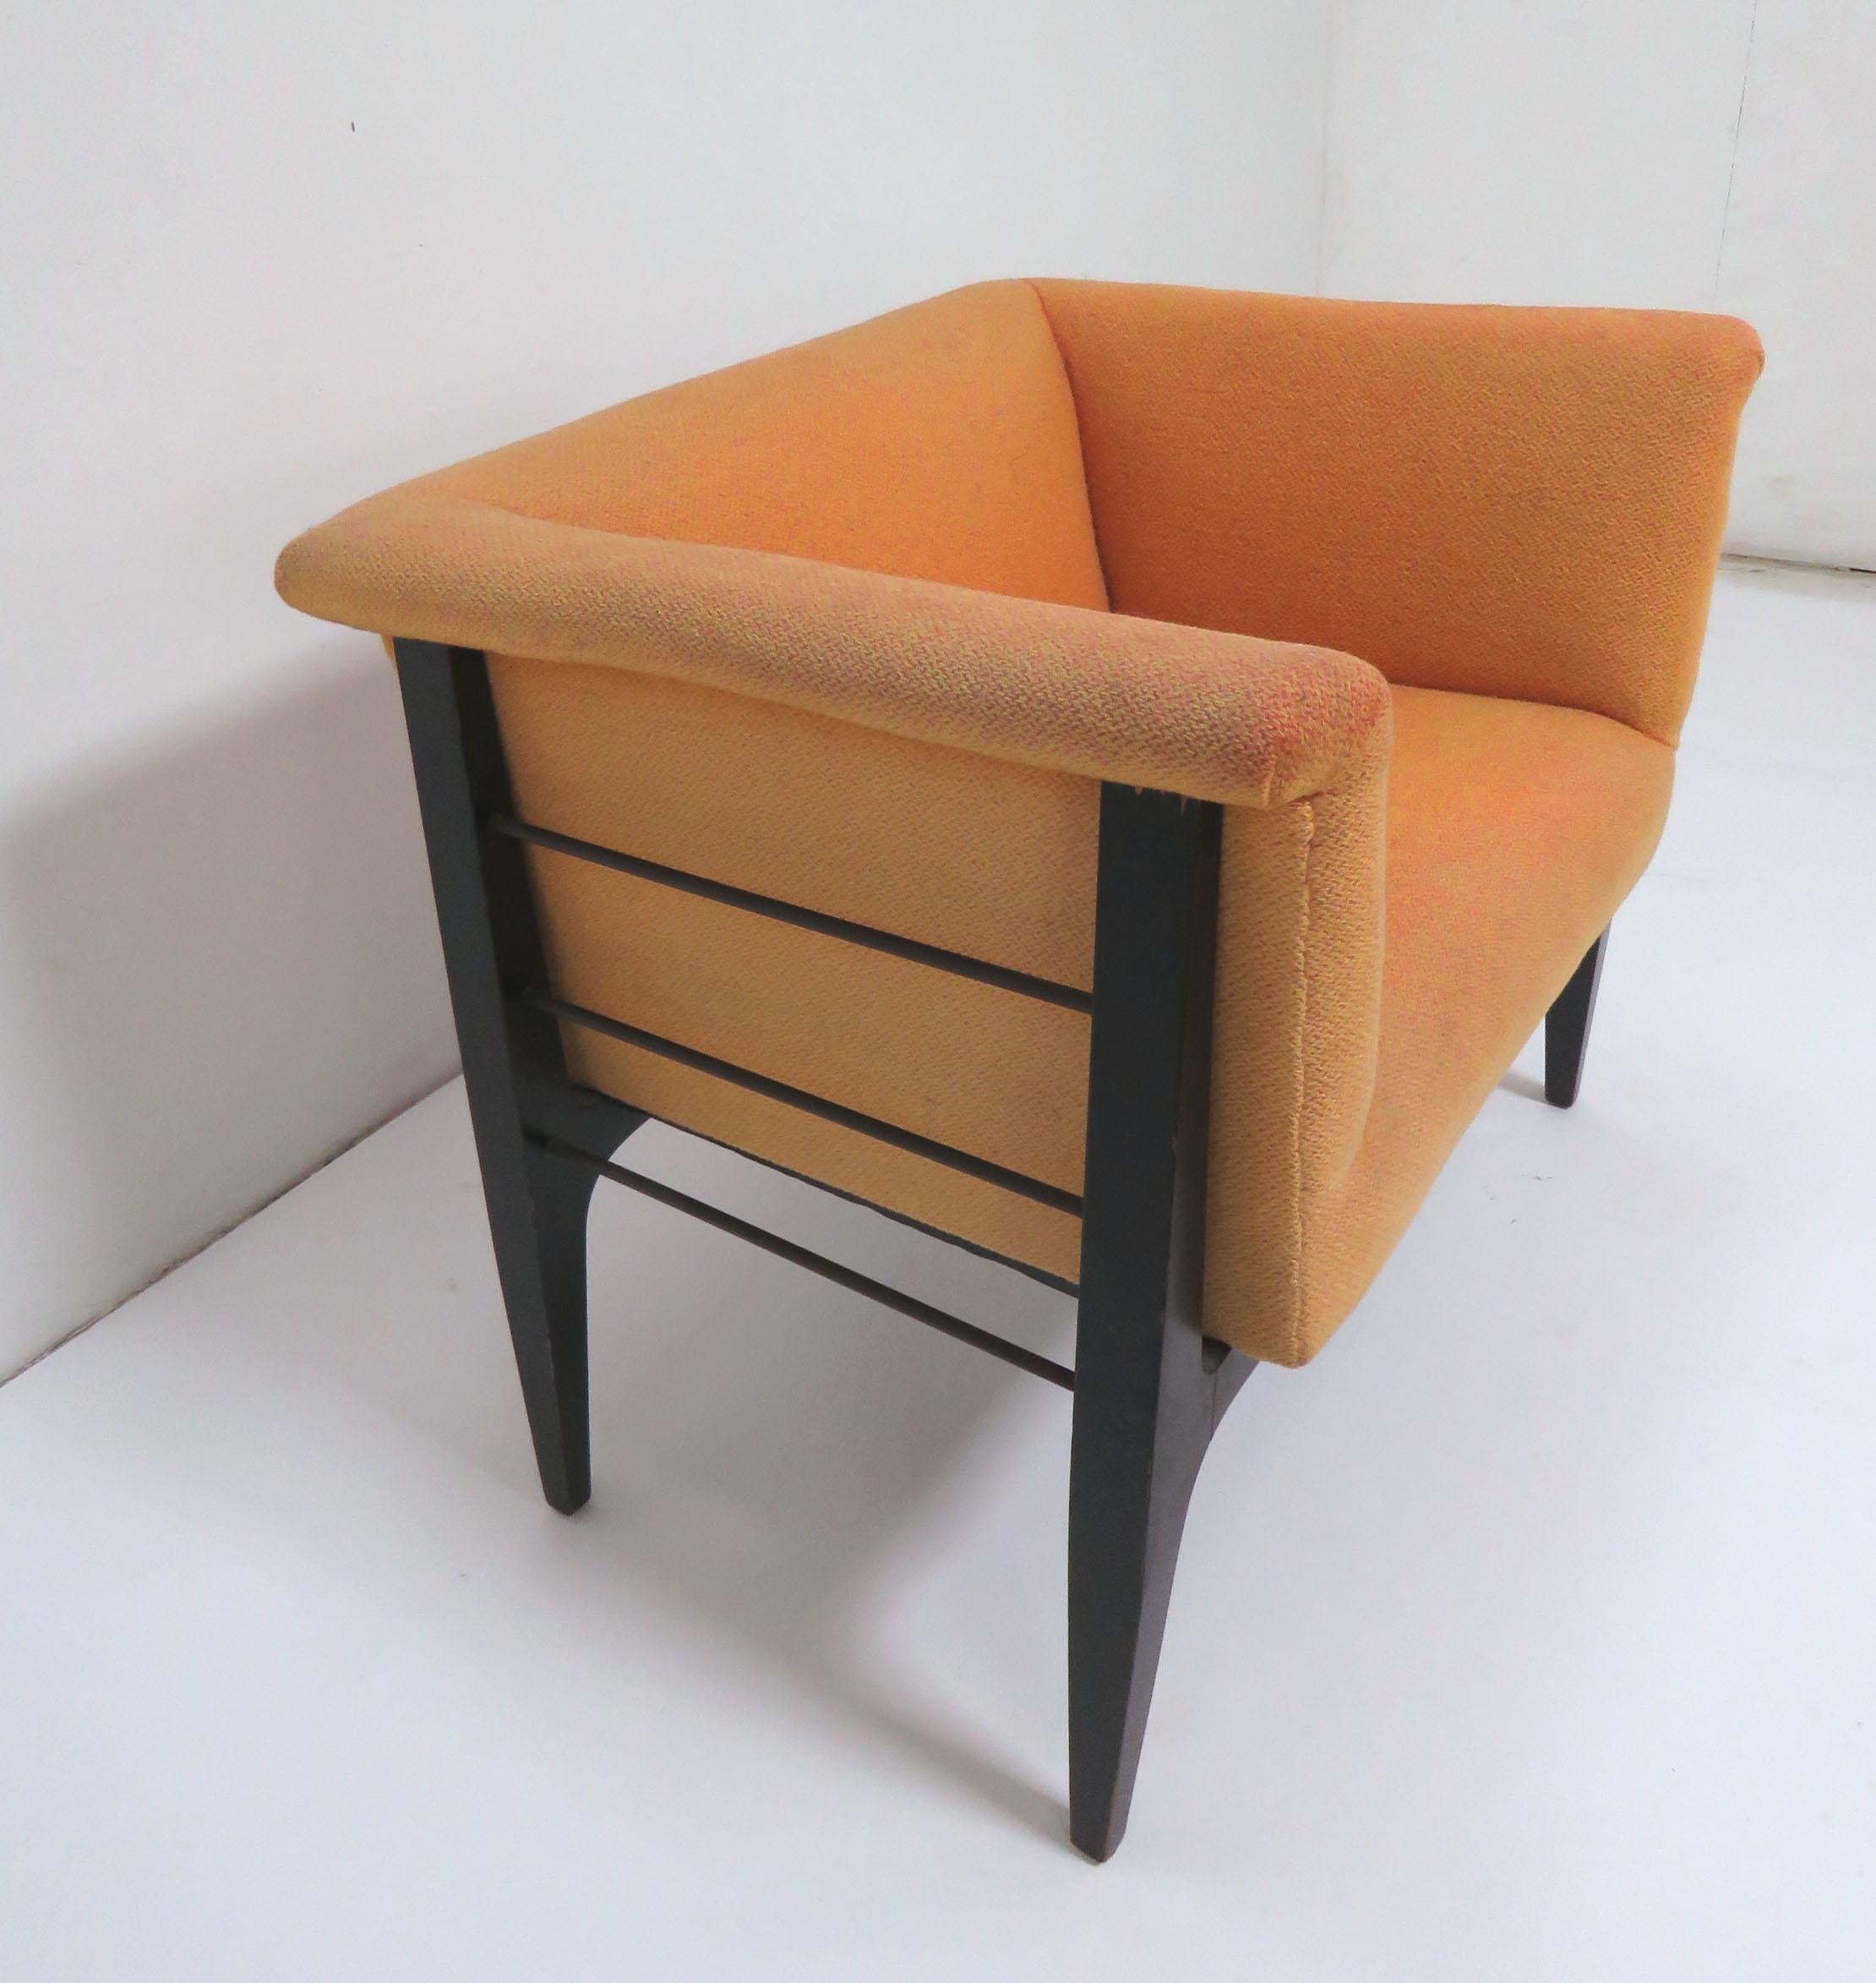 Late 20th Century Mid-Century Modern Armchair in Manner of Harvey Probber For Sale